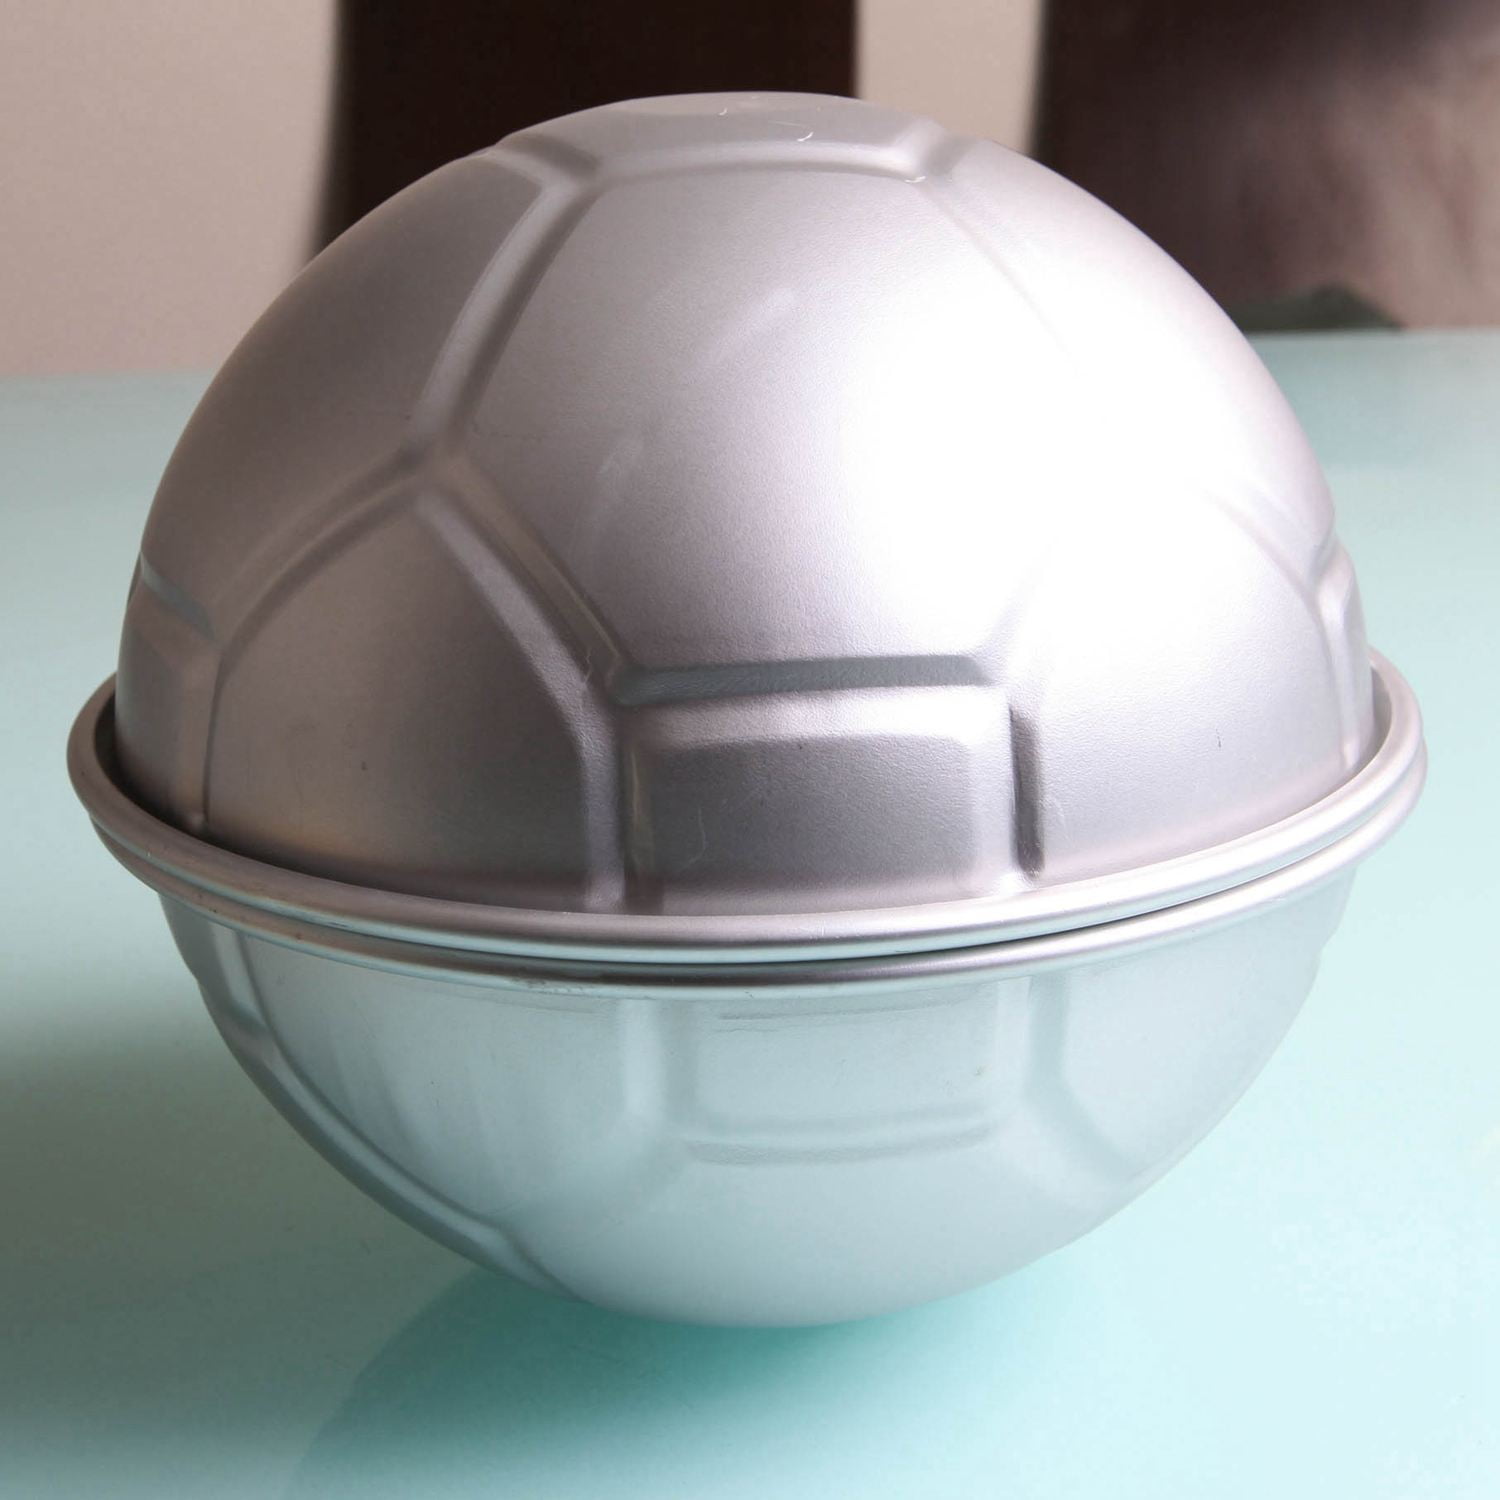 Cake decorating supplies Dubai - Aluminum Haft Ball Football Cake Pan - 49  AED Attractive styling and easy to operate mold, is your good helper for  baking DIY. Color: Sliver. Available in